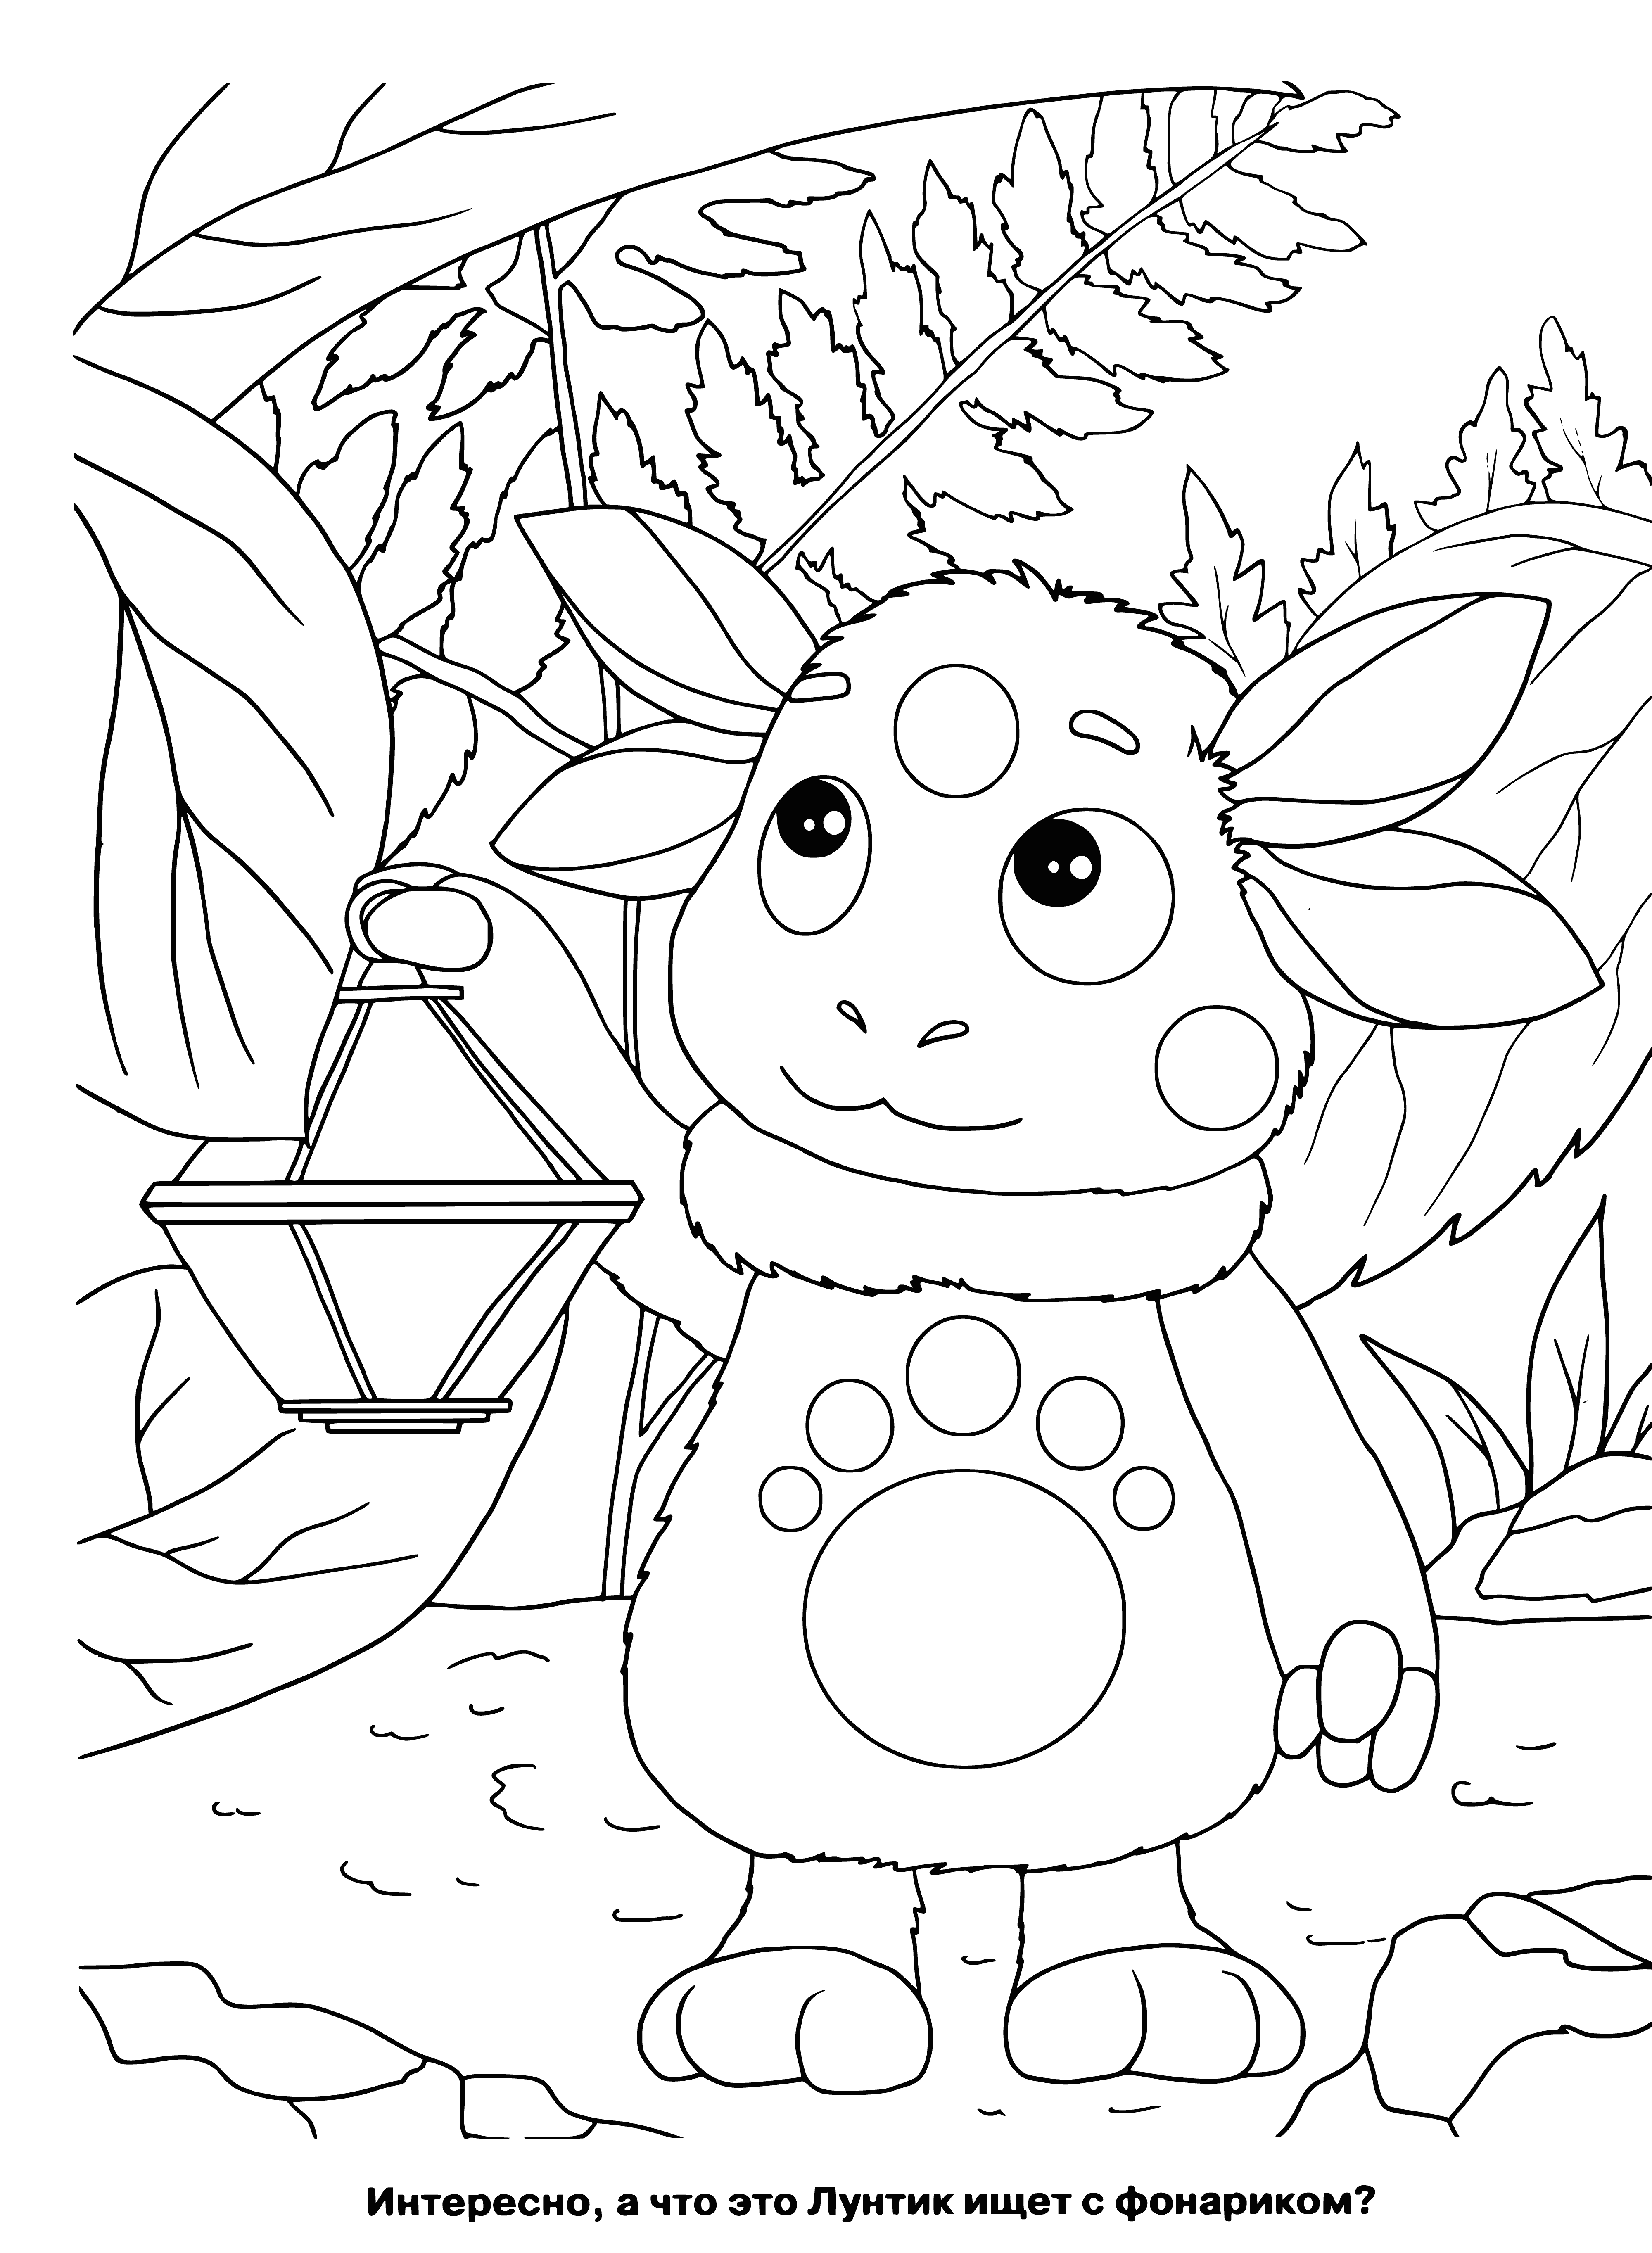 coloring page: Luntik and his friend have big smiles as they stand together, illuminated by a flashlight.